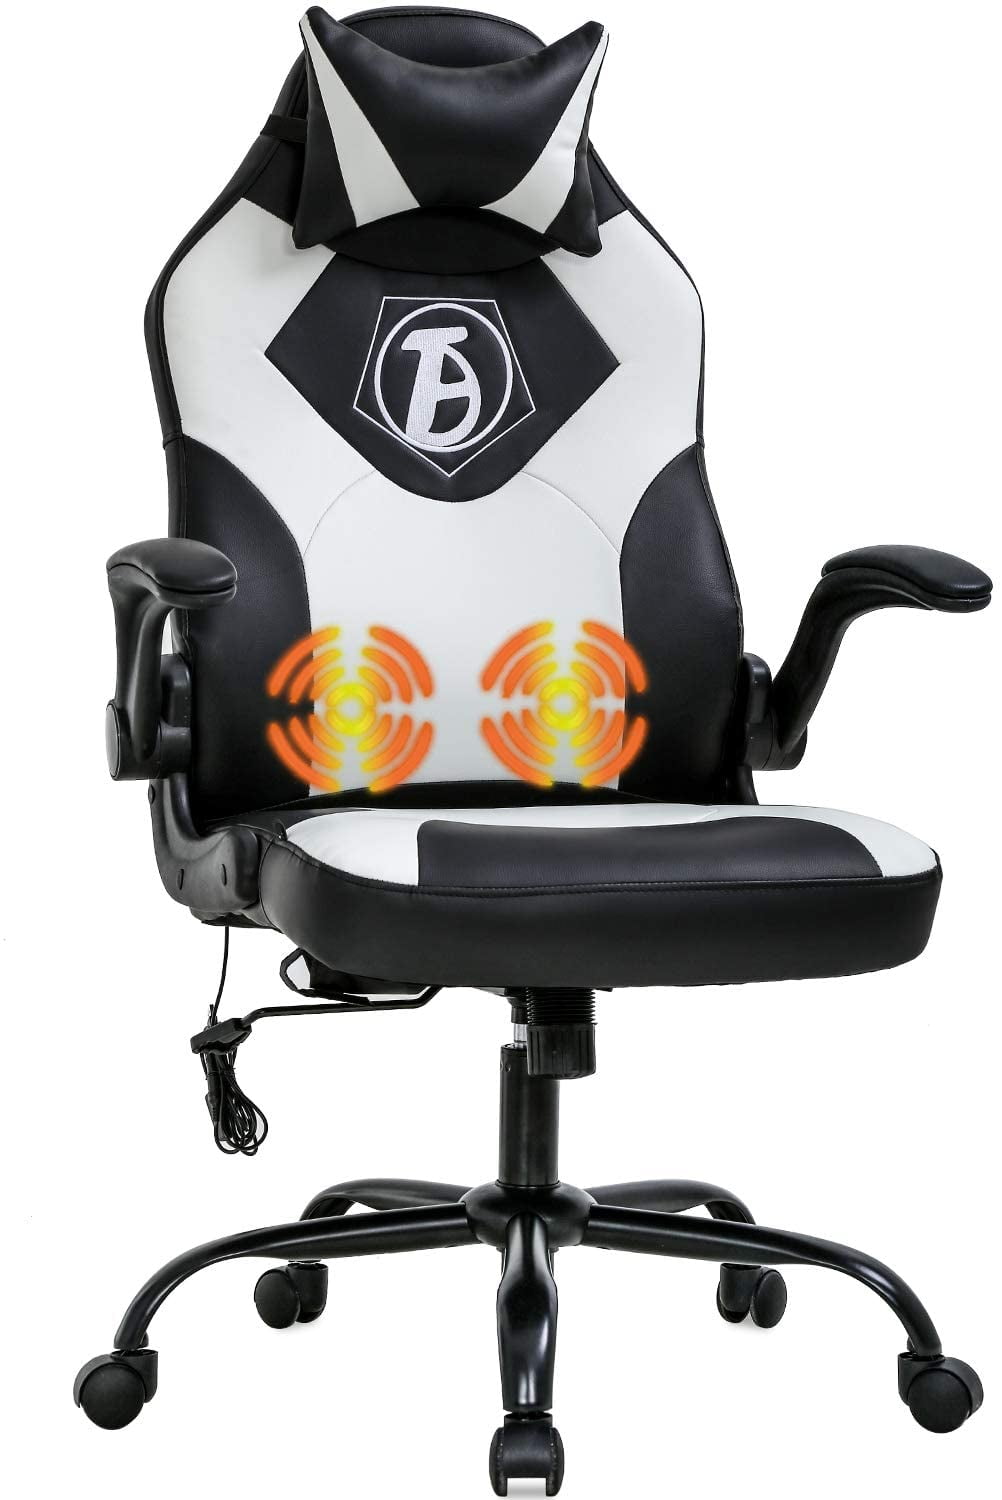 PC Gaming Chair Massage Office Chair Ergonomic Desk Chair Adjustable PU Leather 